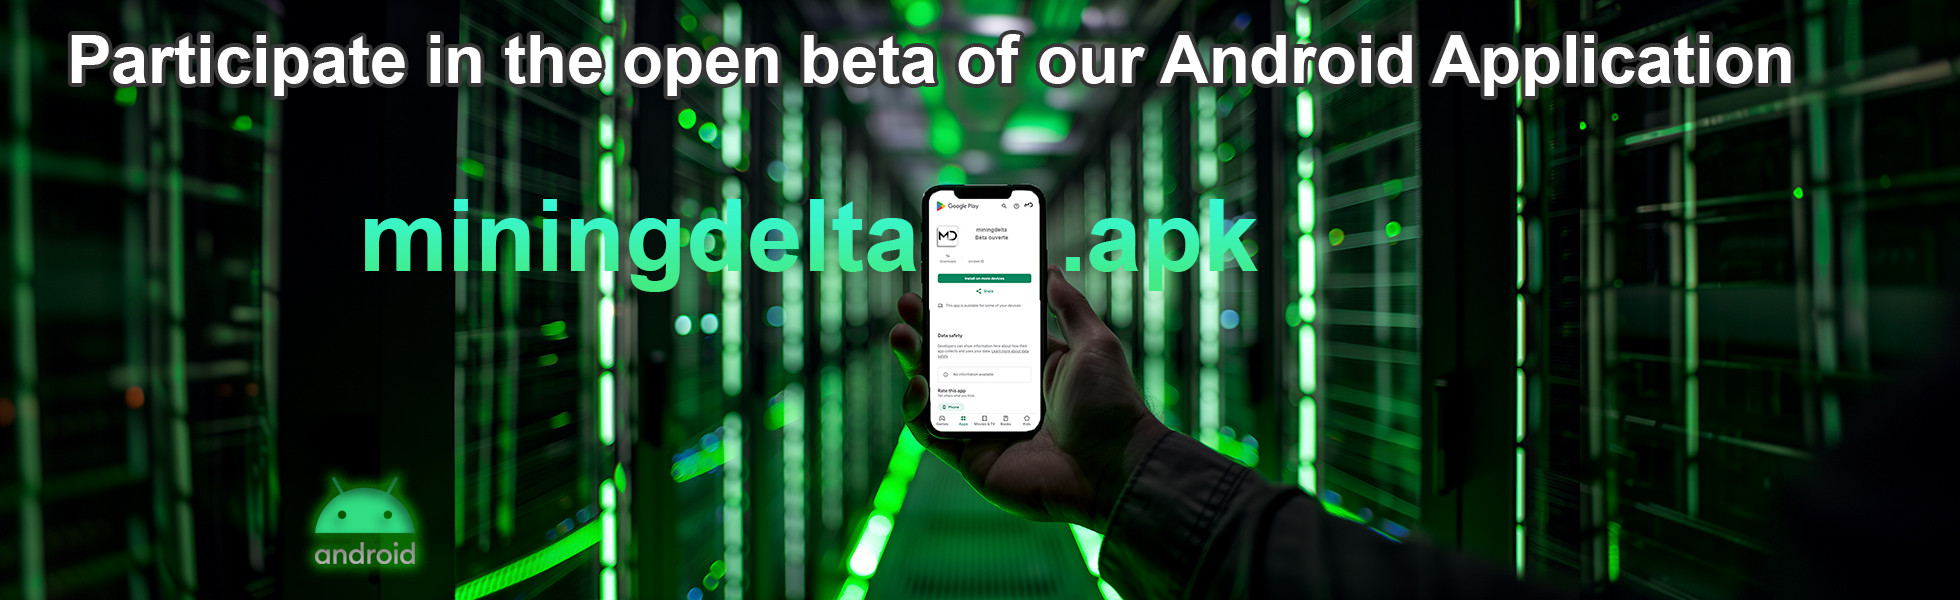 participate in the open beta of our Android Application